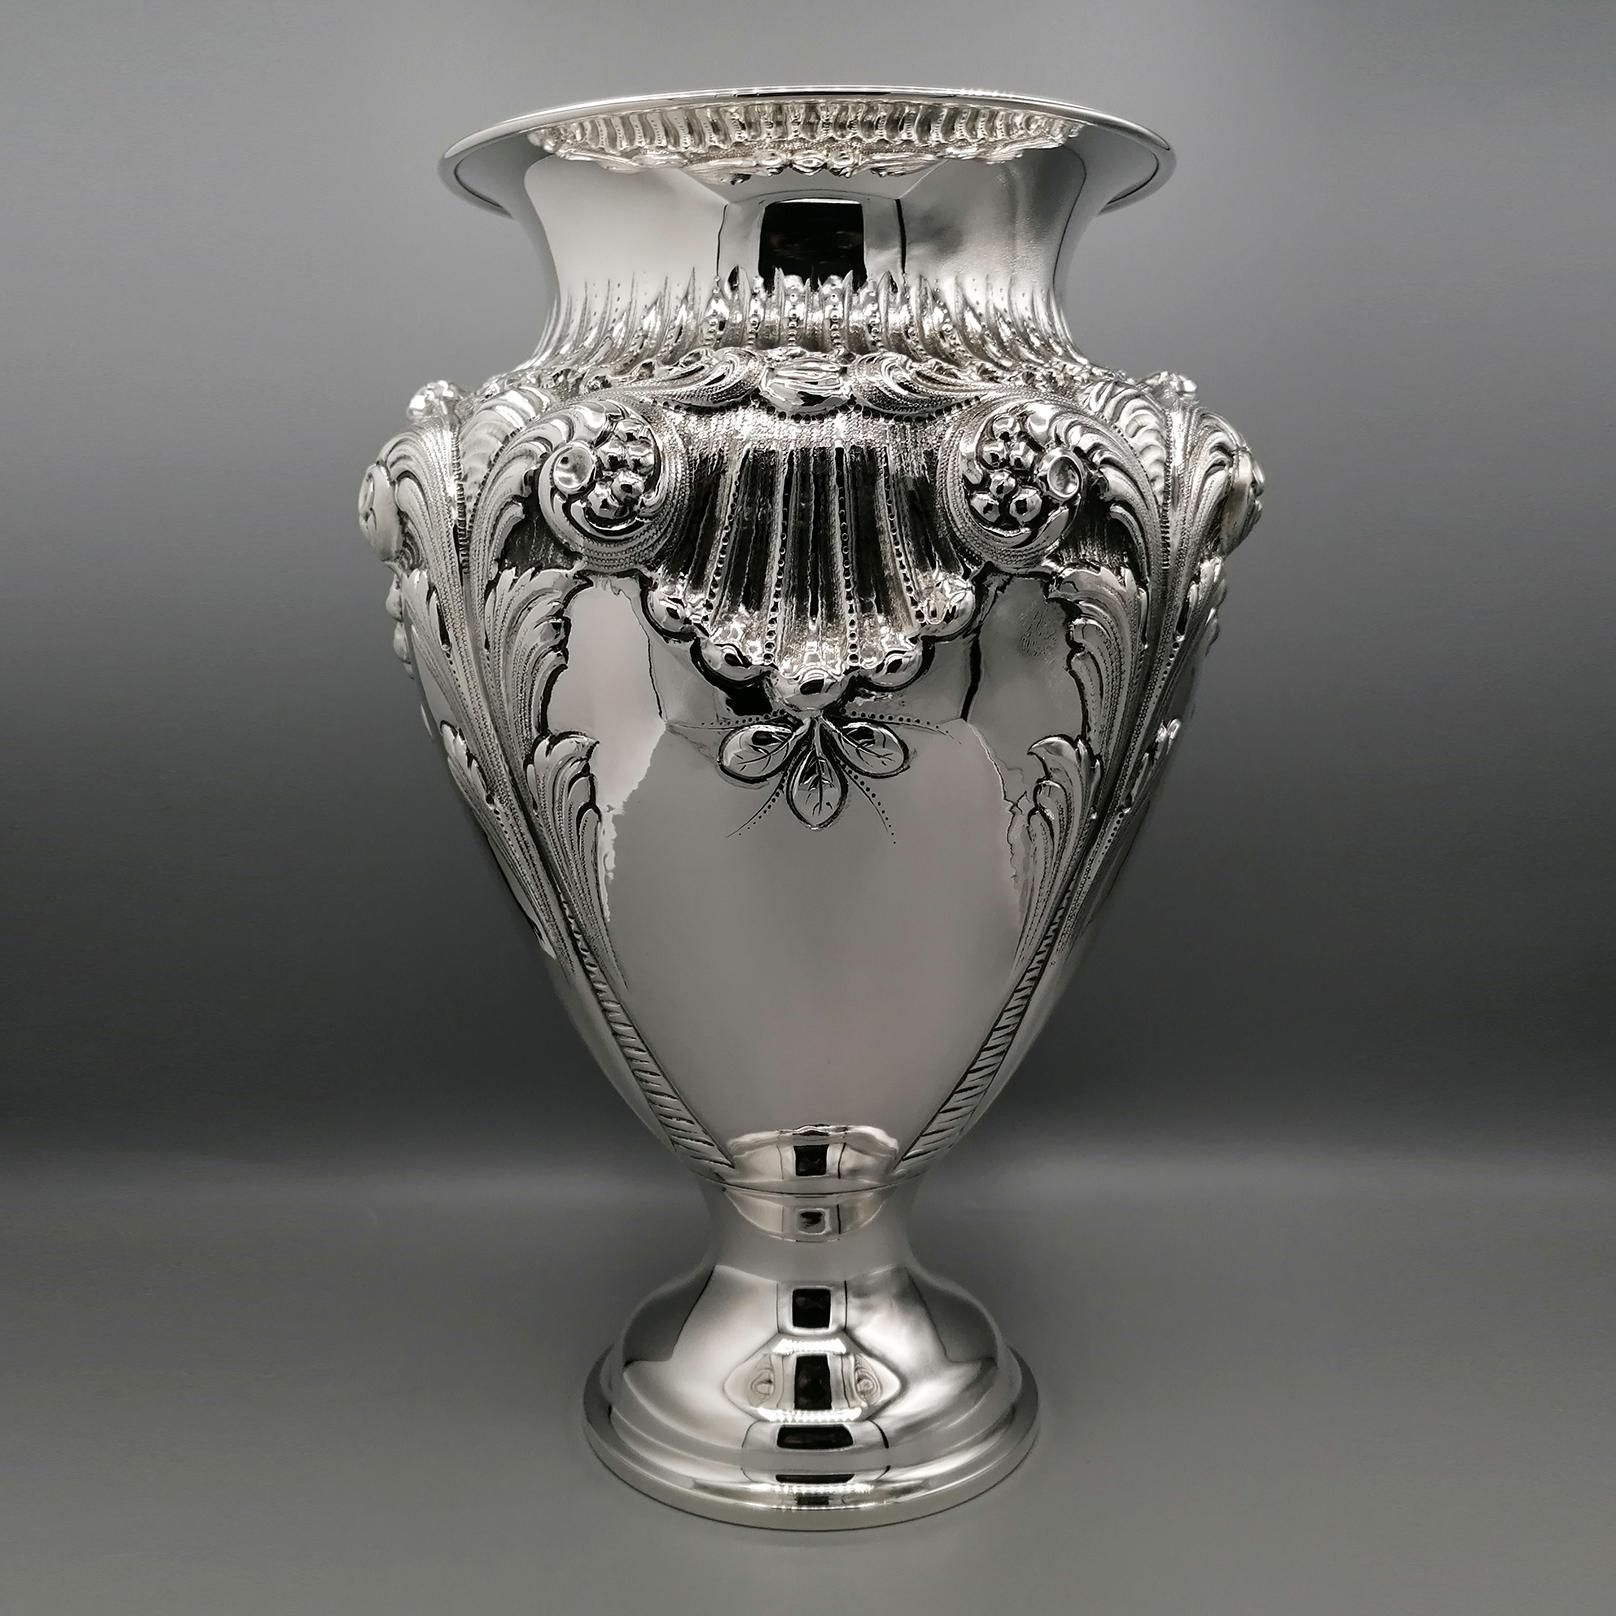 Large baroque style sterling silver vase.
The body of the vase has been masterfully embossed with shells, flowers and volutes, typical of the Baroque style.
Still in the body of the vase, some parts have been left shiny to highlight the great